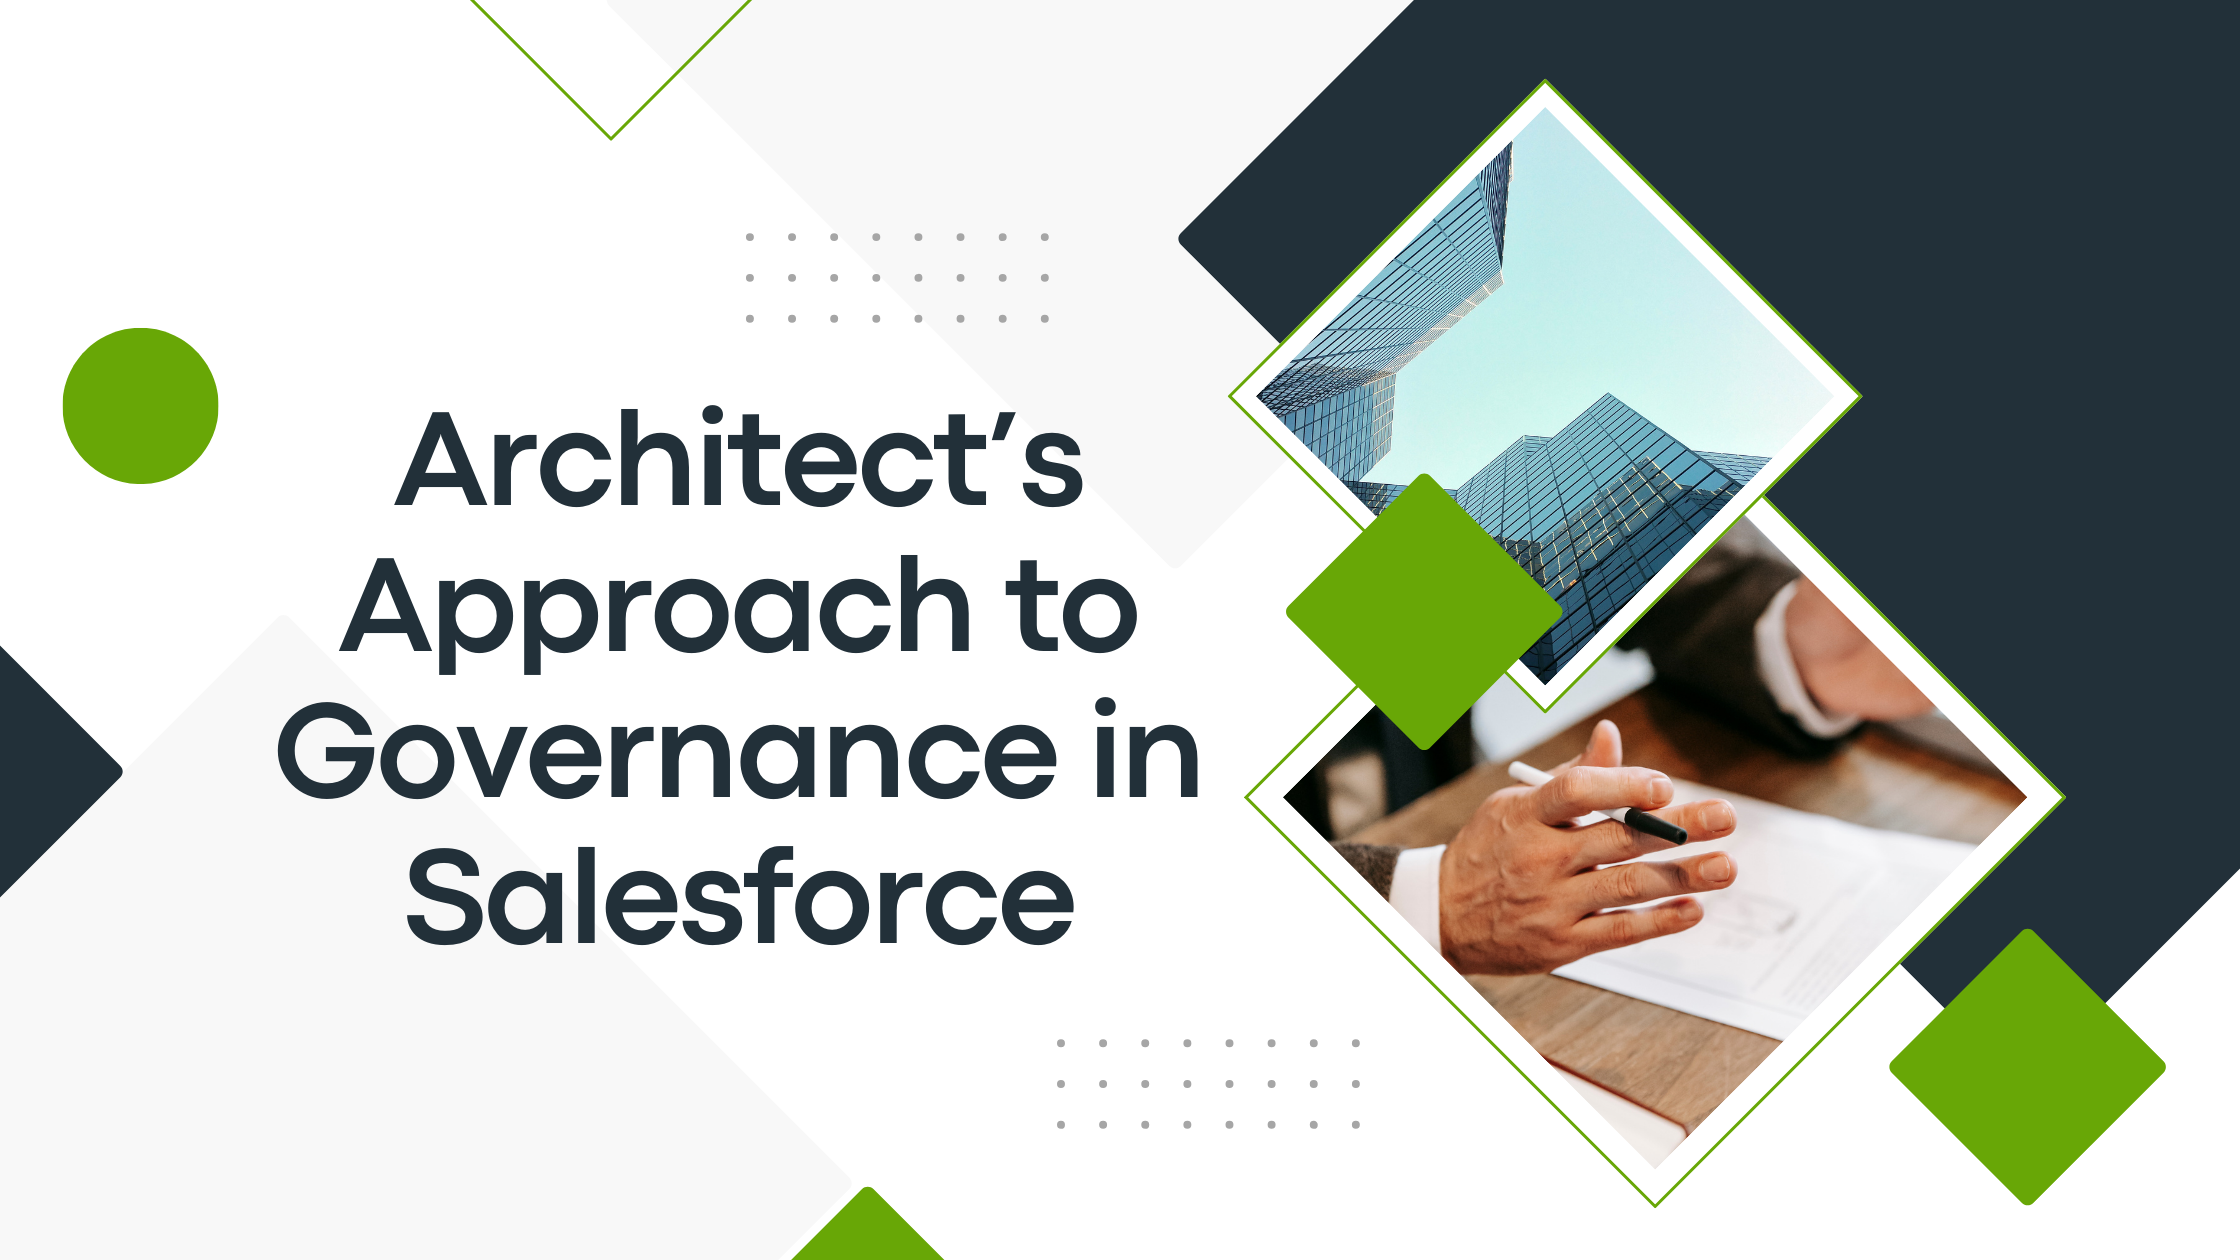 Architect’s Approach to Governance in Salesforce